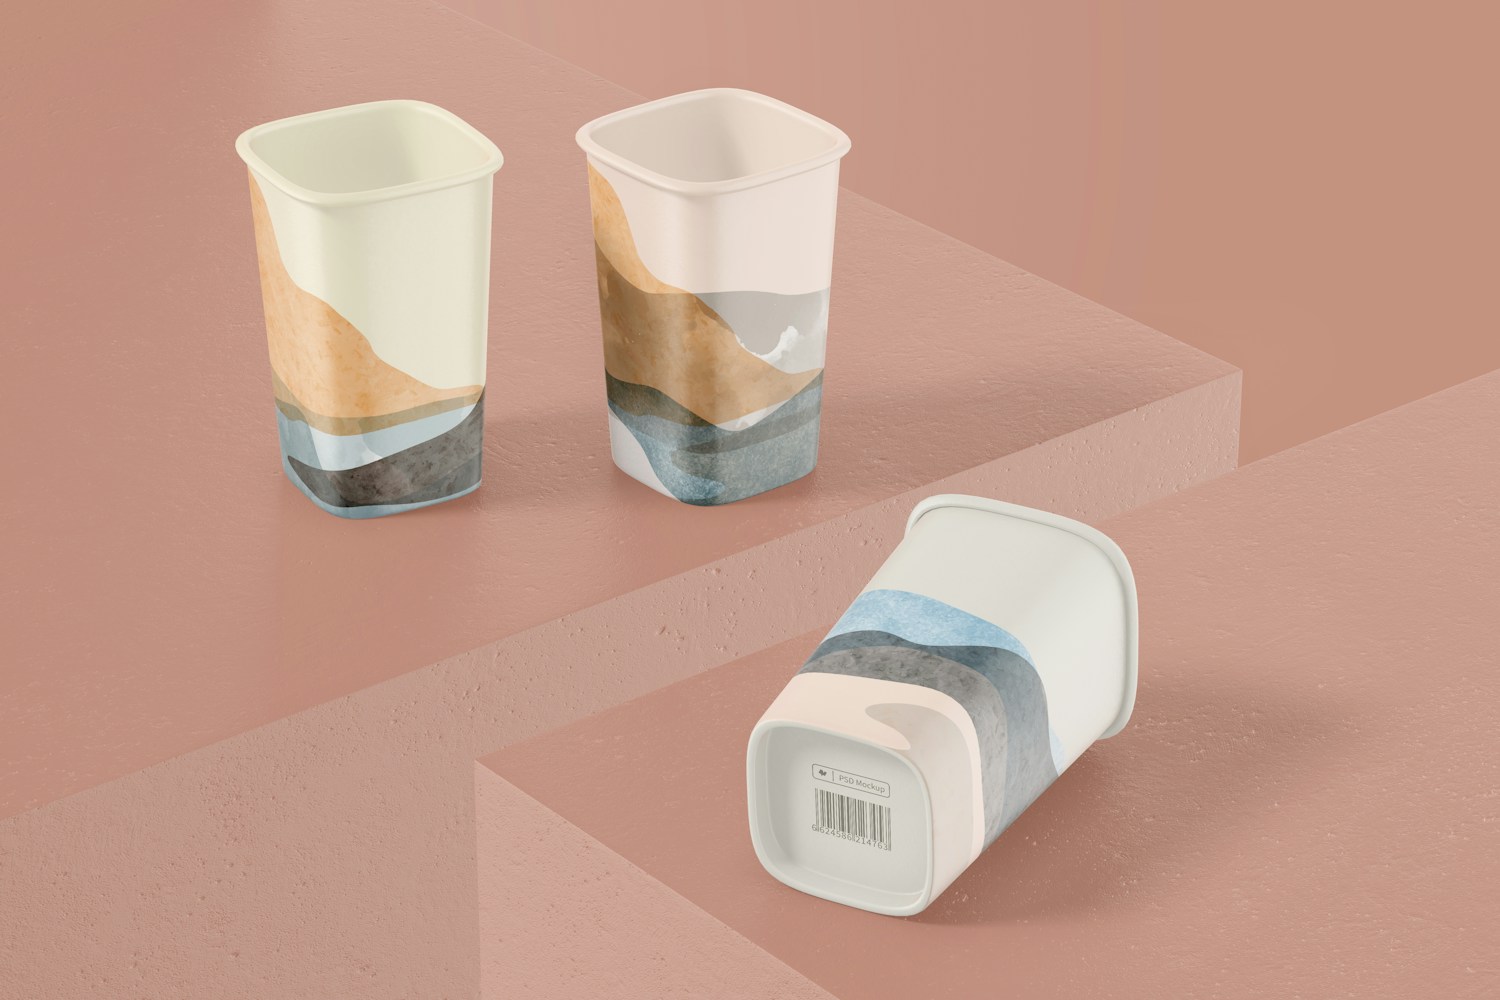 Square Paper Cup Mockup, Standing and Dropped